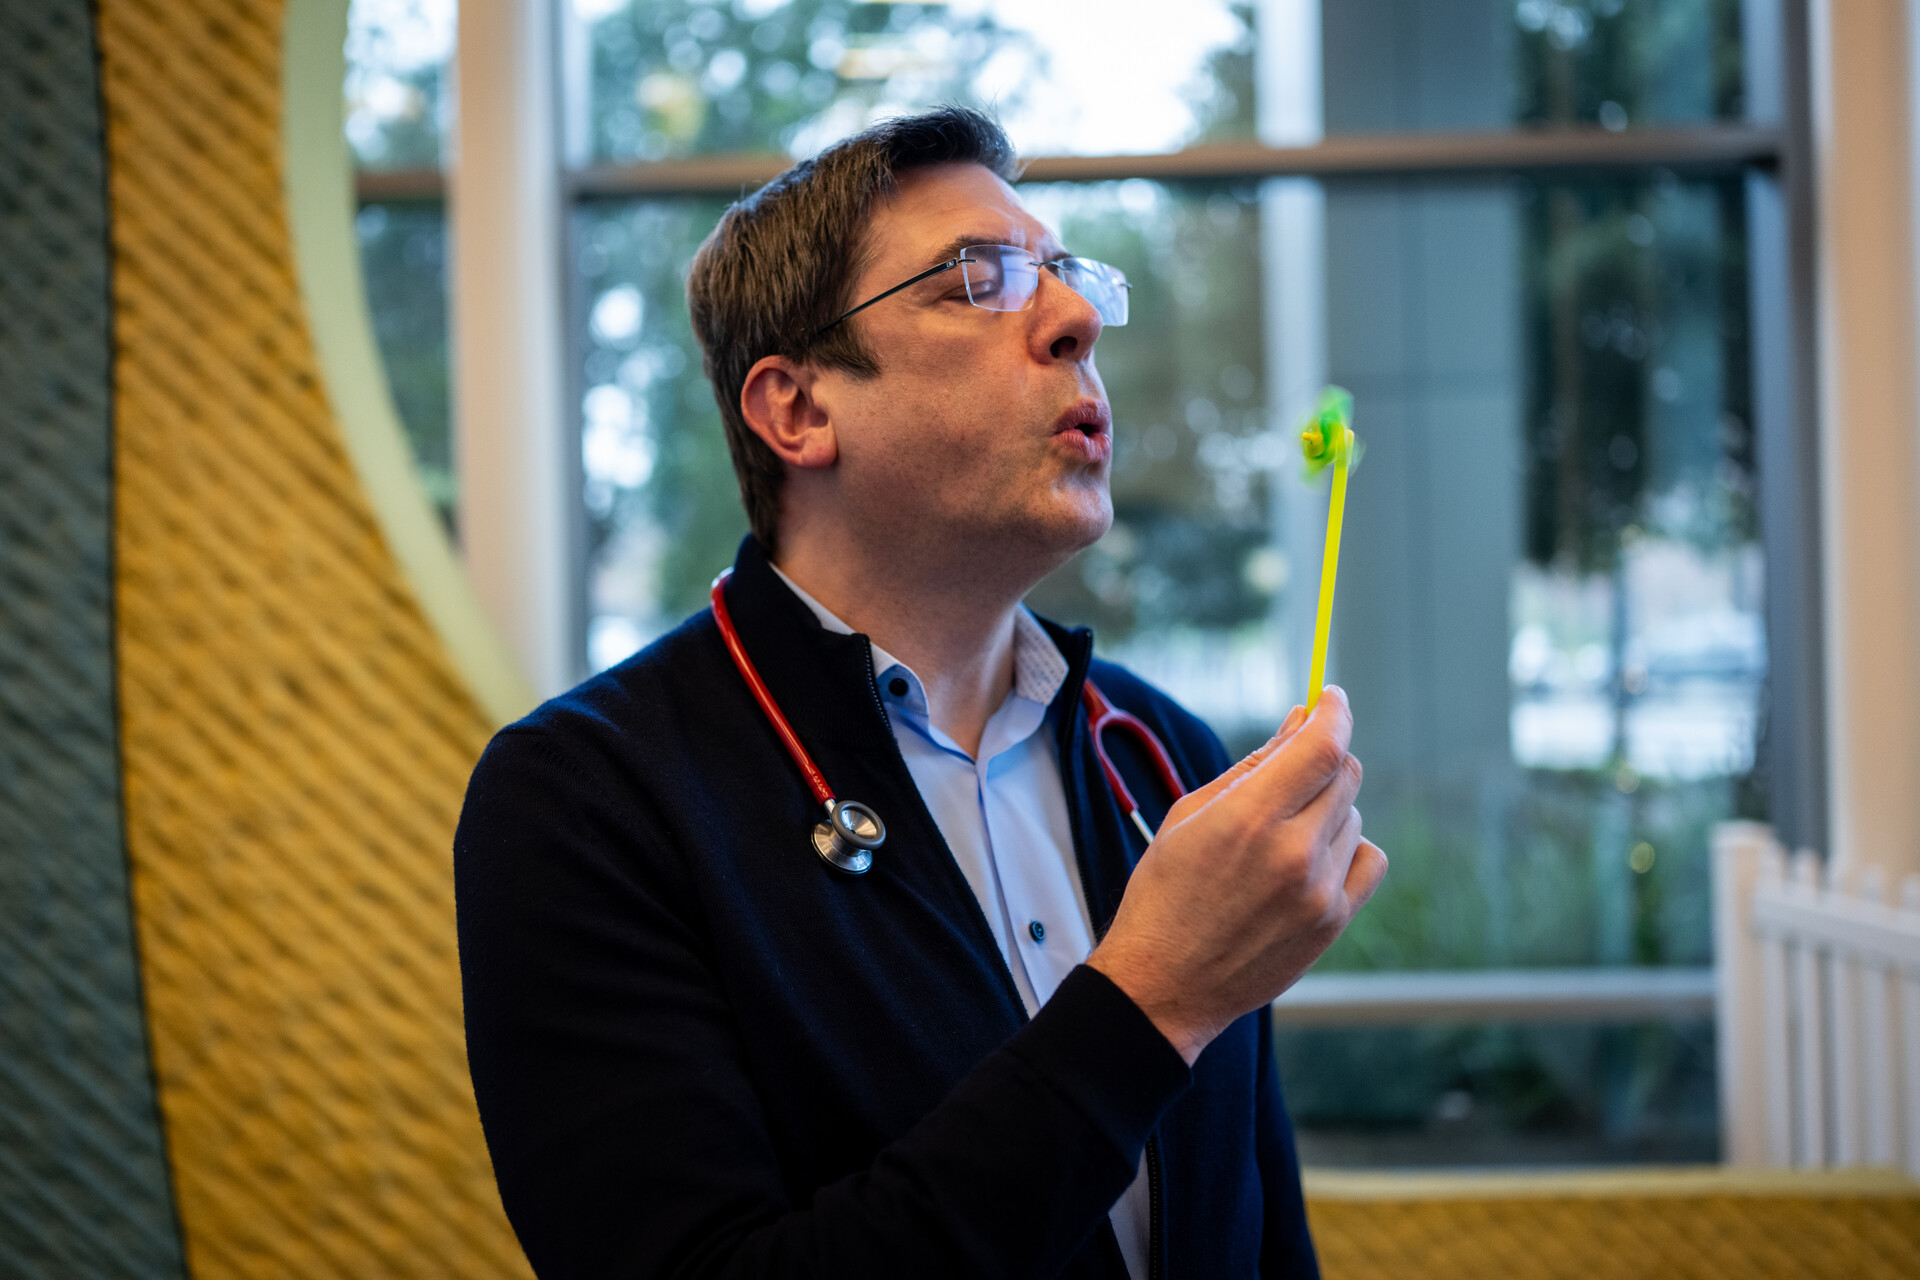 A man with glasses and a stethoscope blows on a mini pinwheel